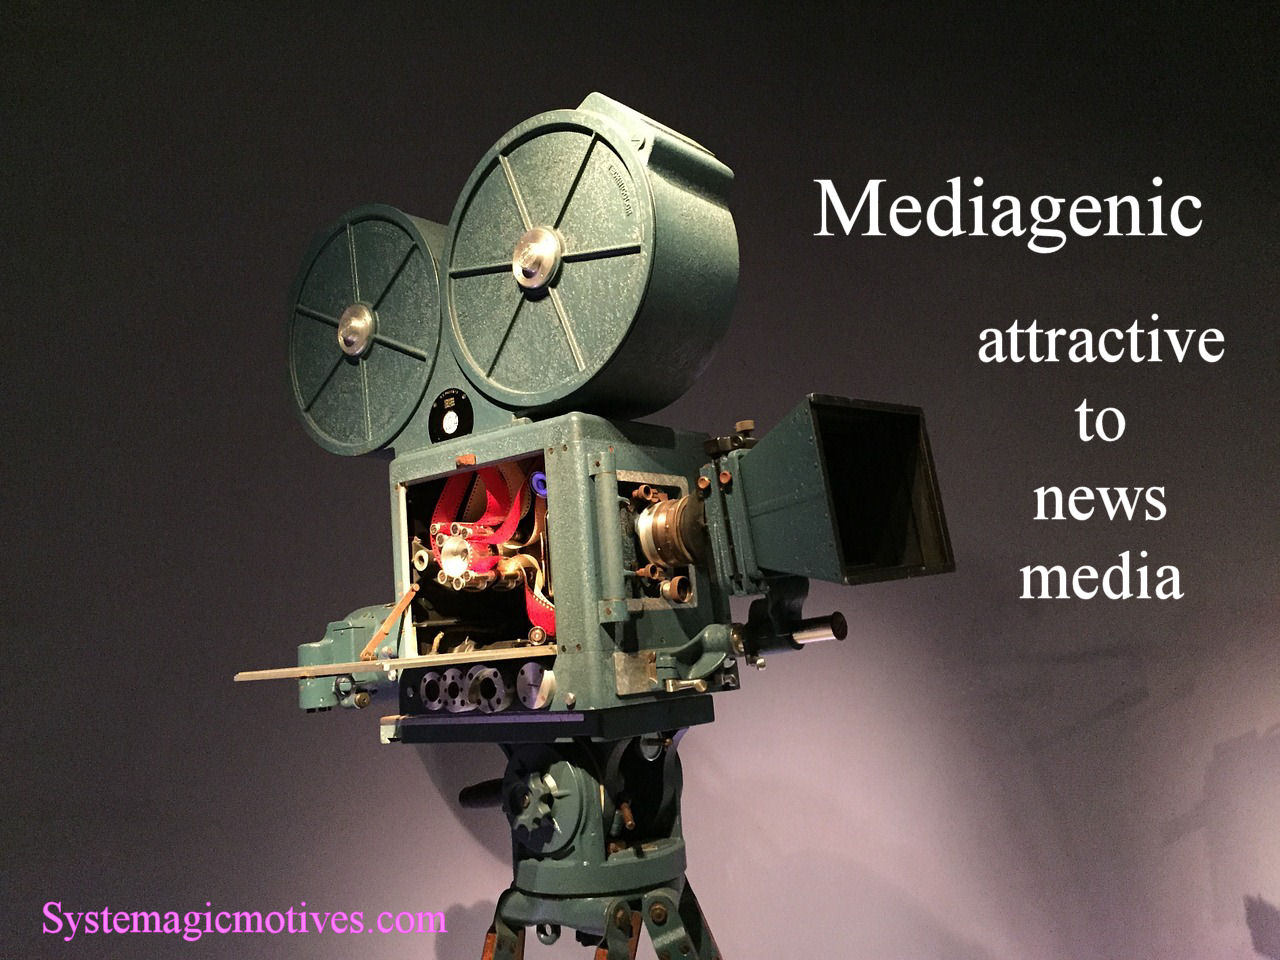 Graphic Definition of Mediagenic